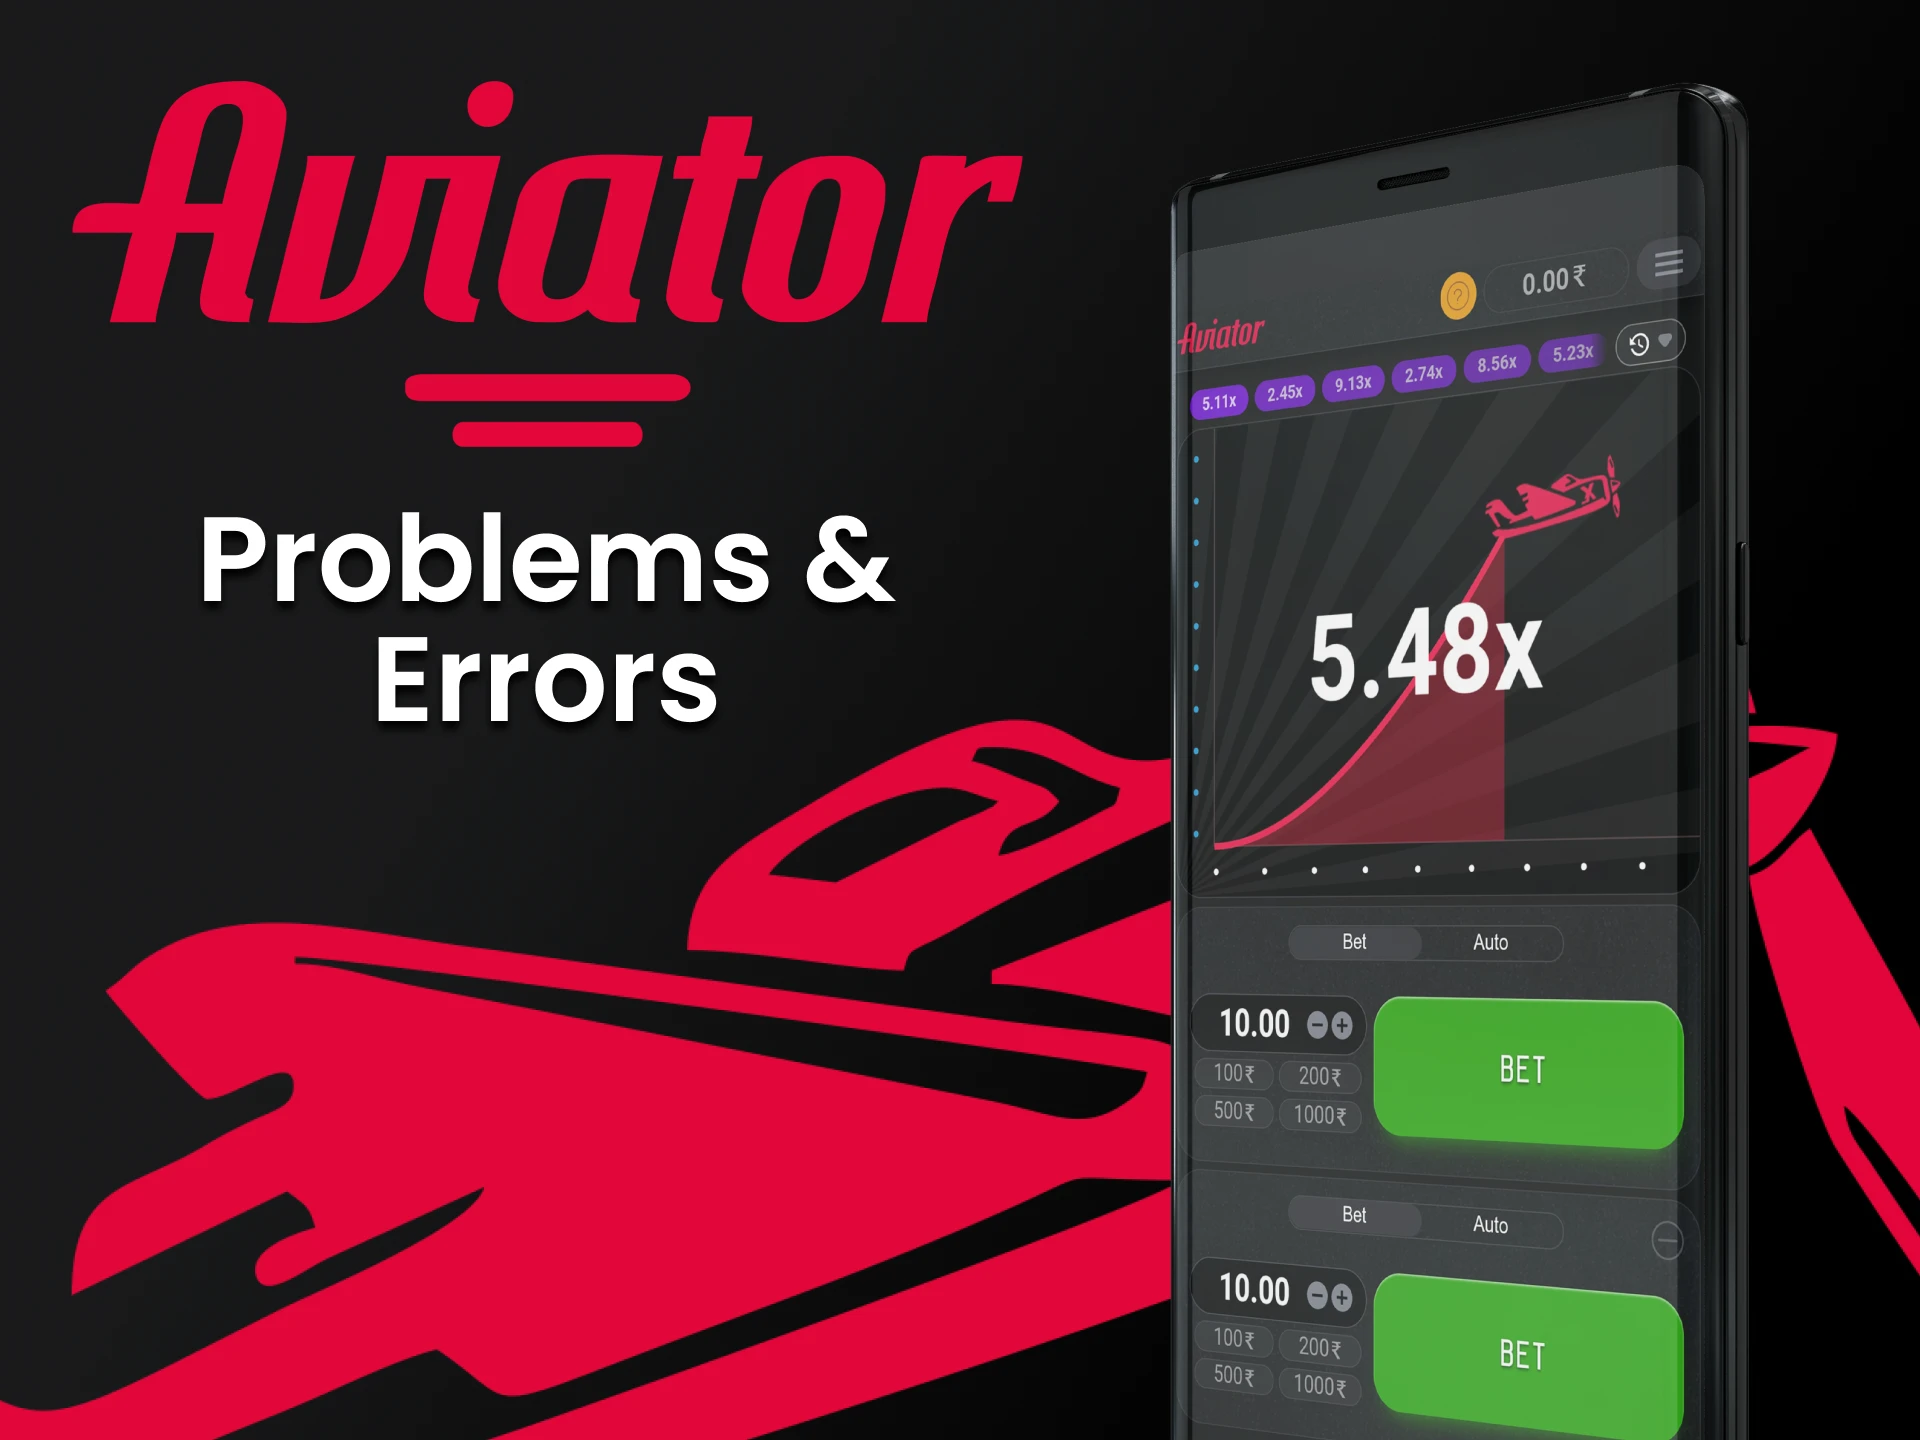 If problems arise, the Aviator team eliminates them as quickly as possible.